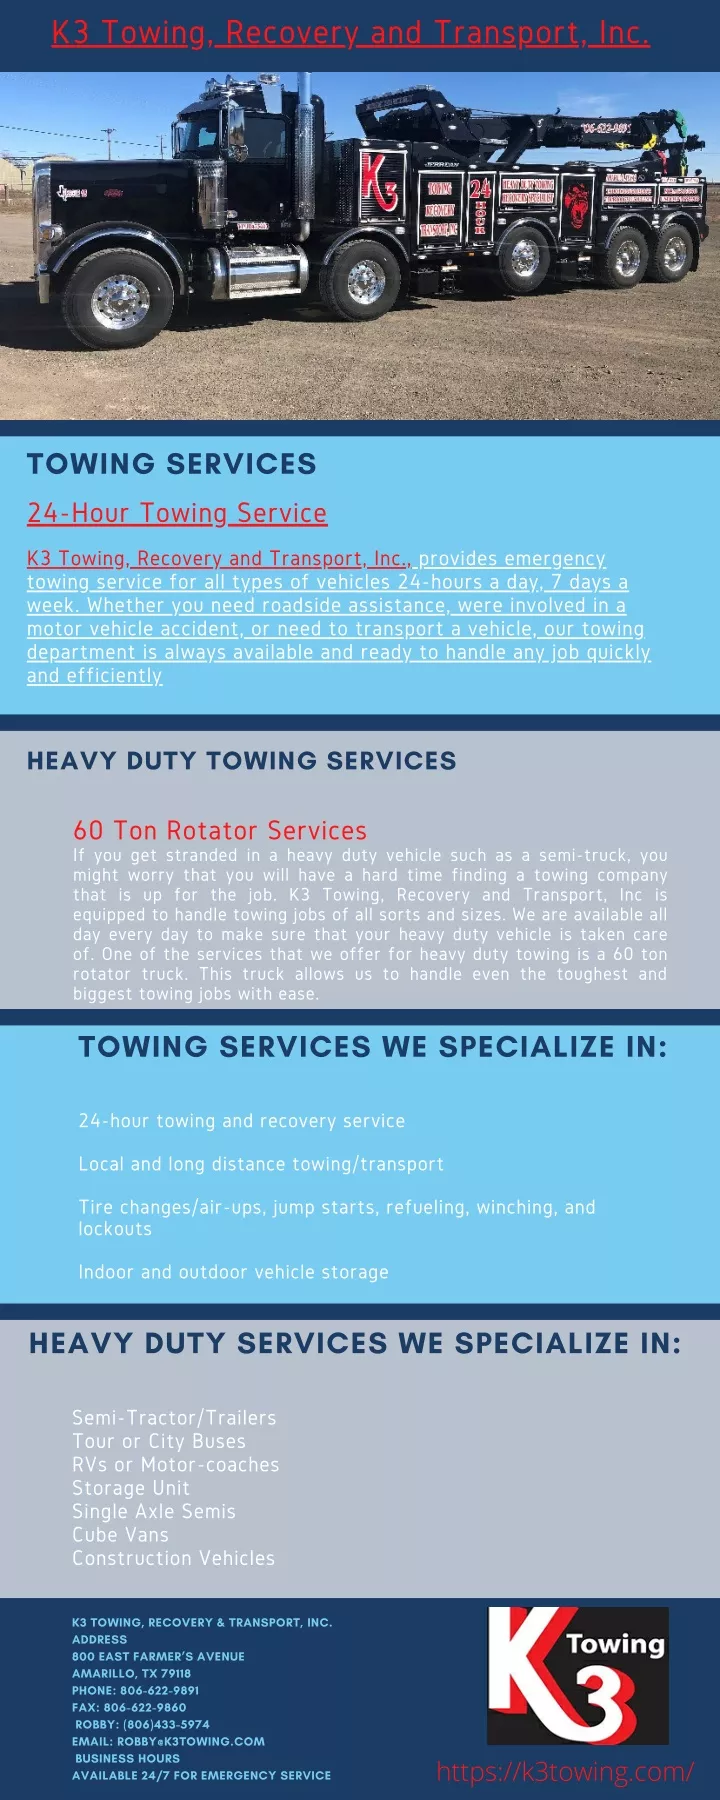 k3 towing recovery and transport inc